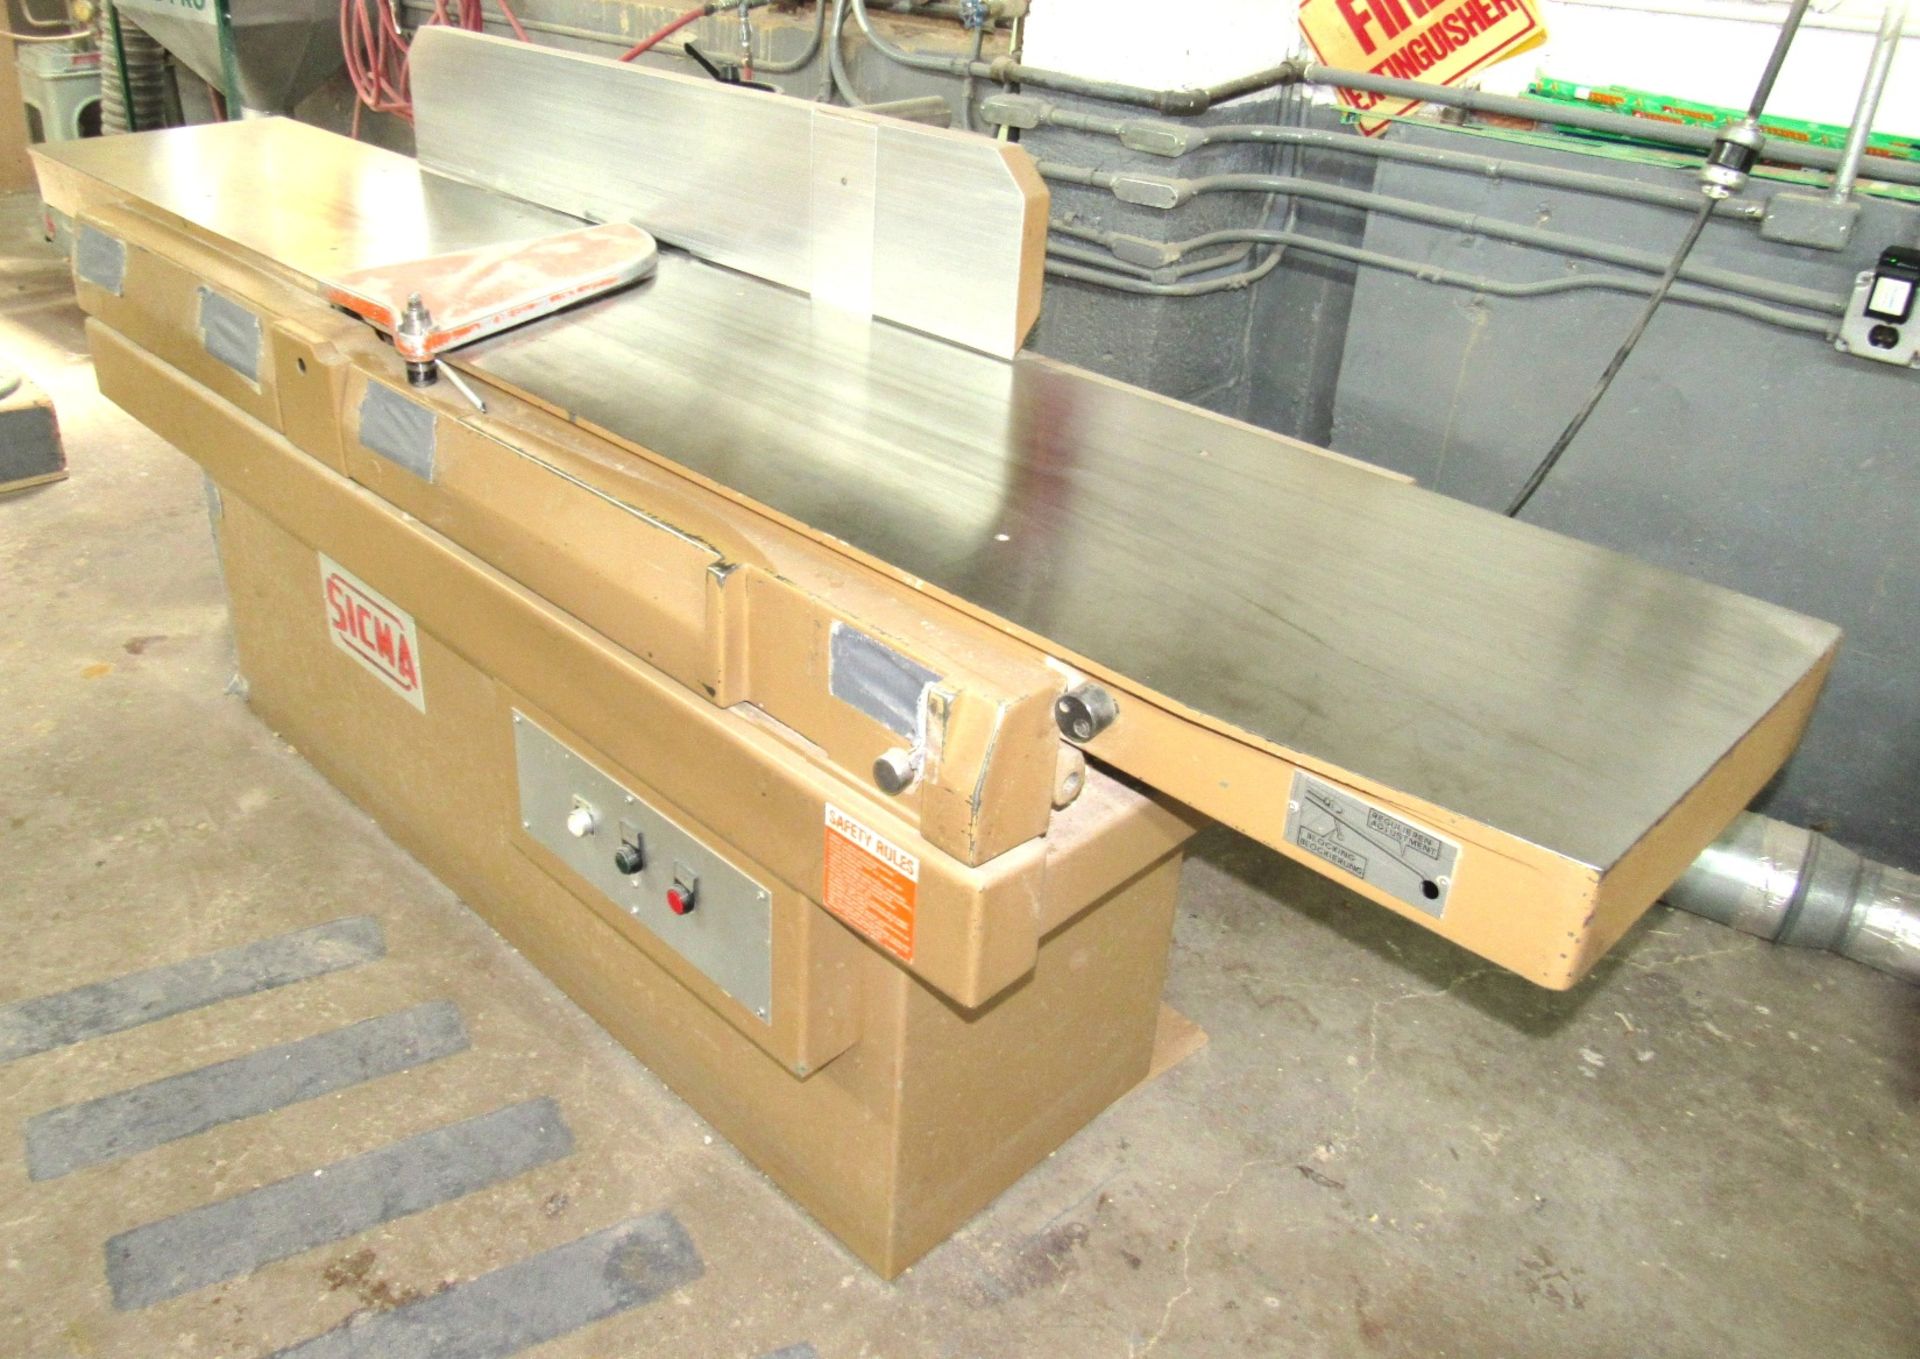 Sicma Mod.DT430 17" Wood Jointer - S/N 4030989, 98" Table Length, 7.5HP, 220/3/60 - Image 3 of 5